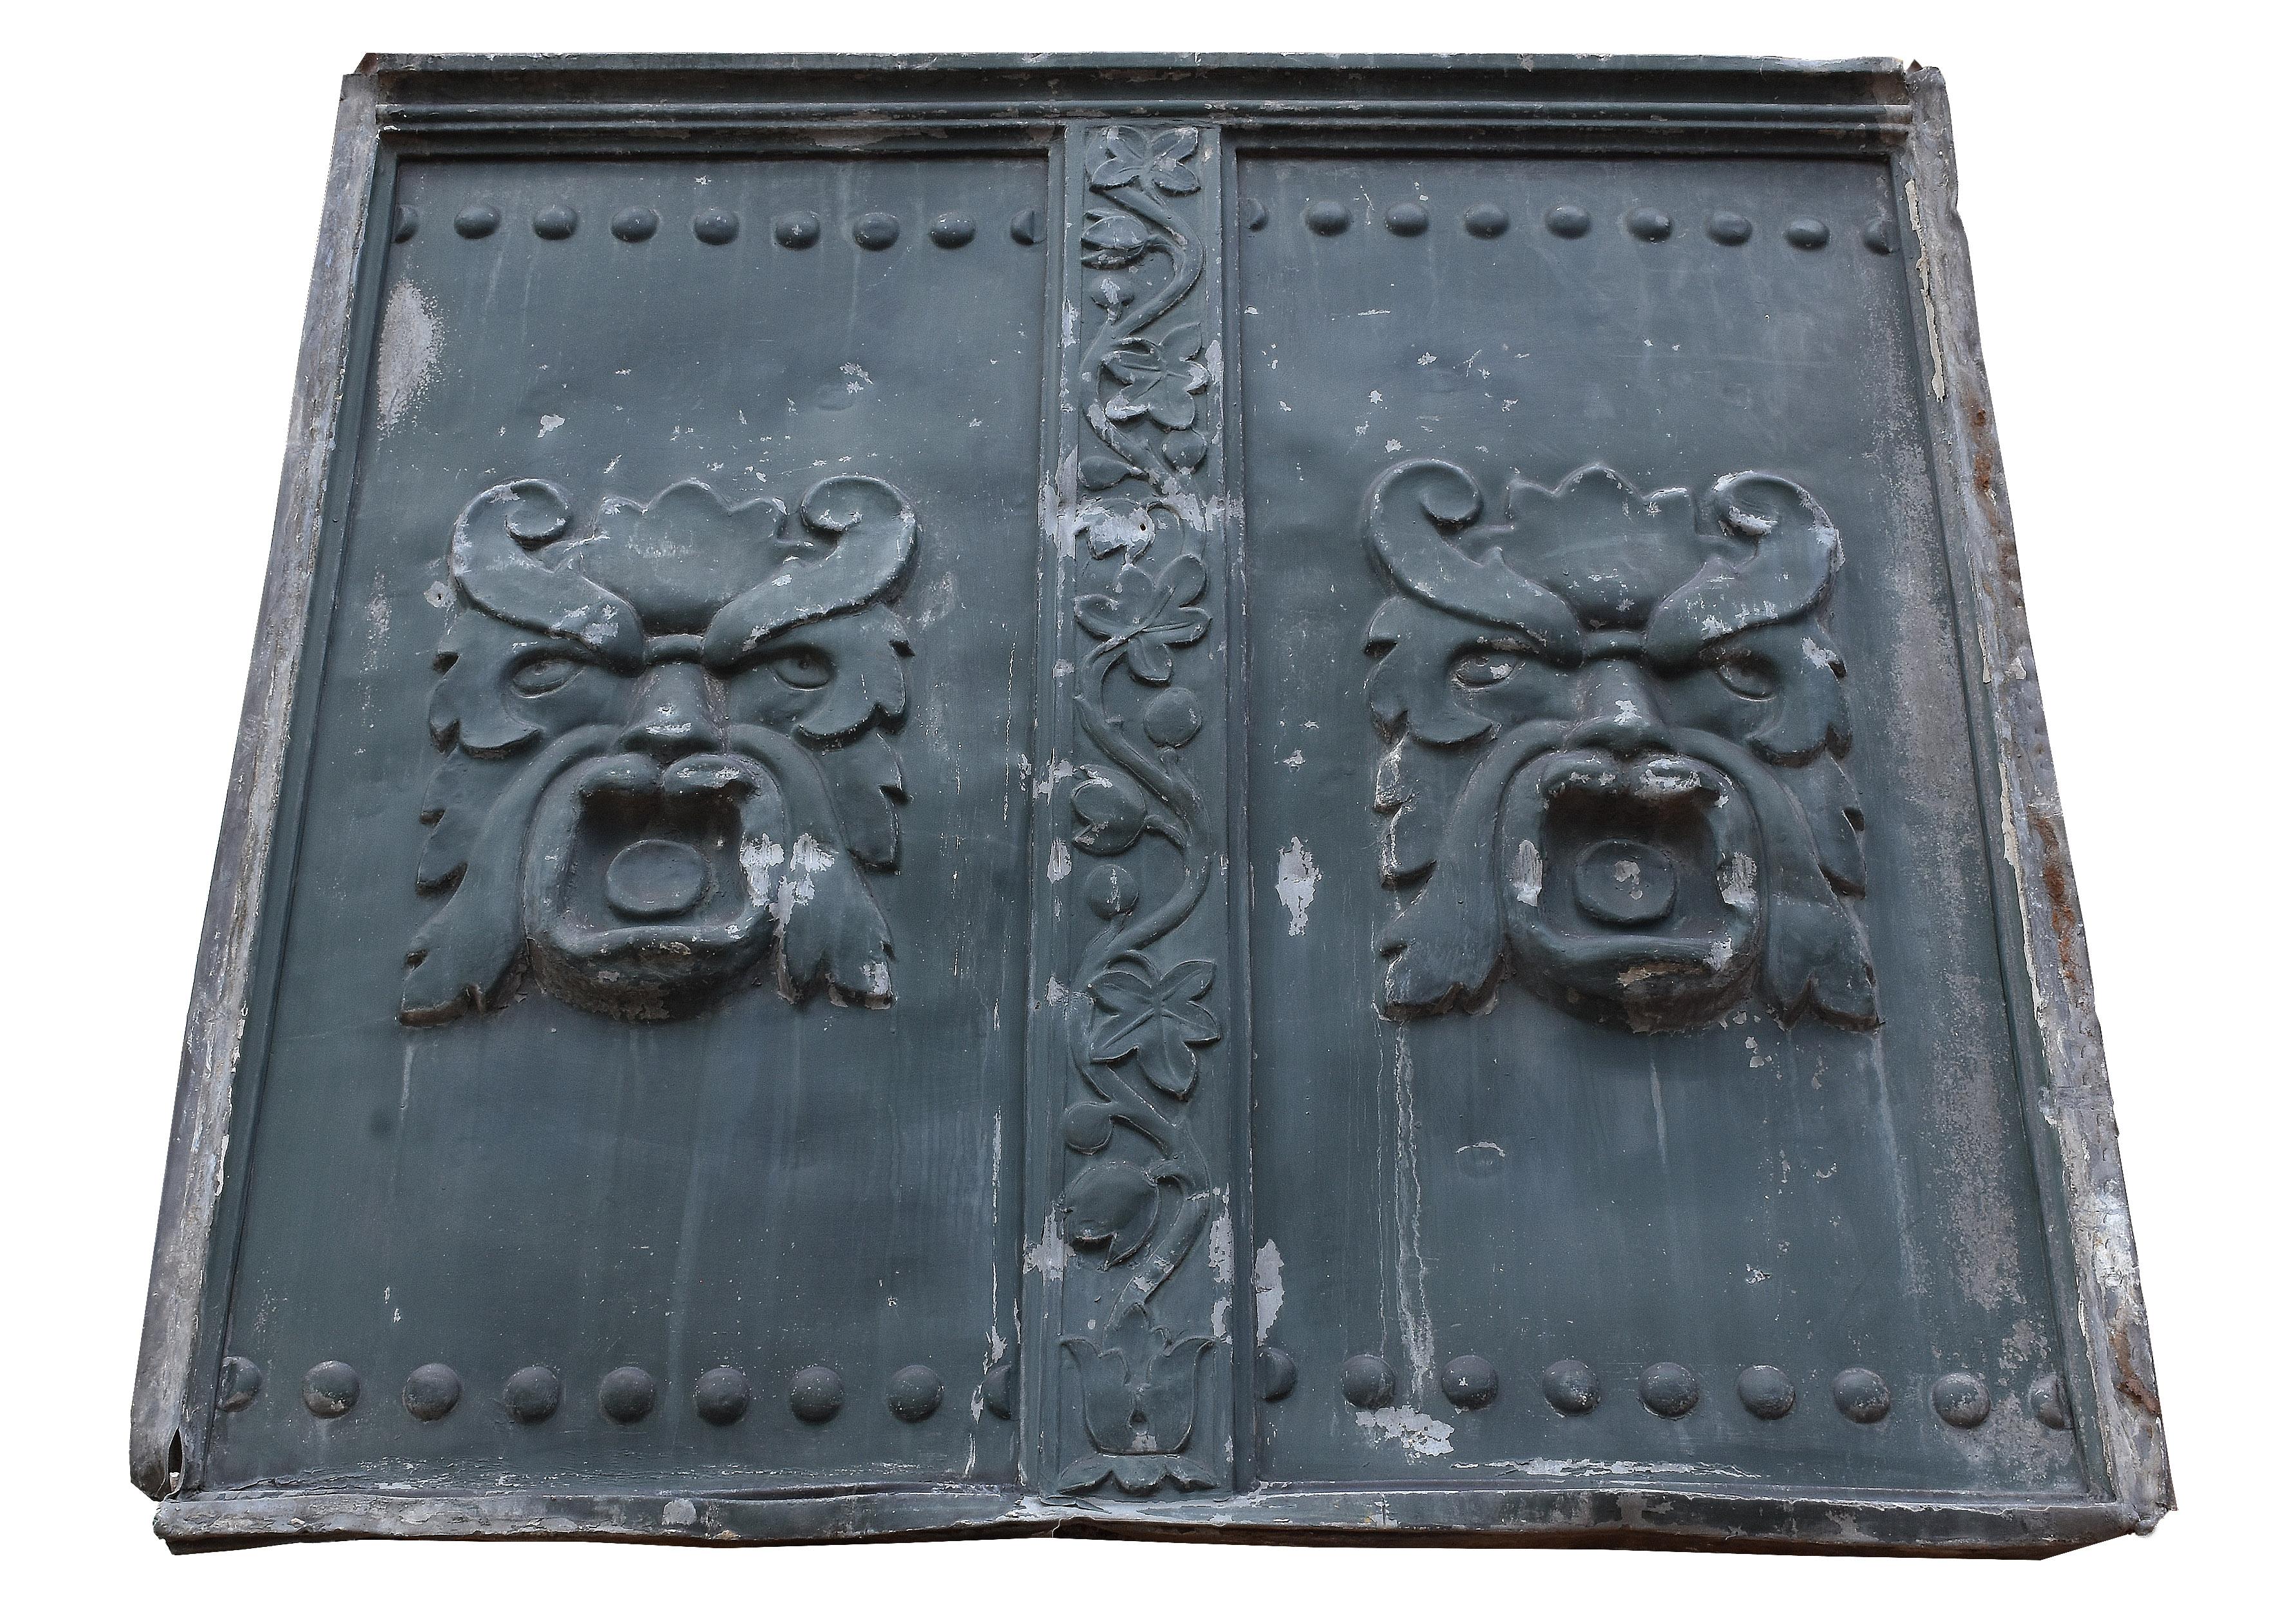 These impressive pressed metal building panels once adorned the side of a Chicago skyscraper. They feature the face of the “north wind” blowing air. This kind of face can be found throughout Gothic Revival architecture, more often on buildings where